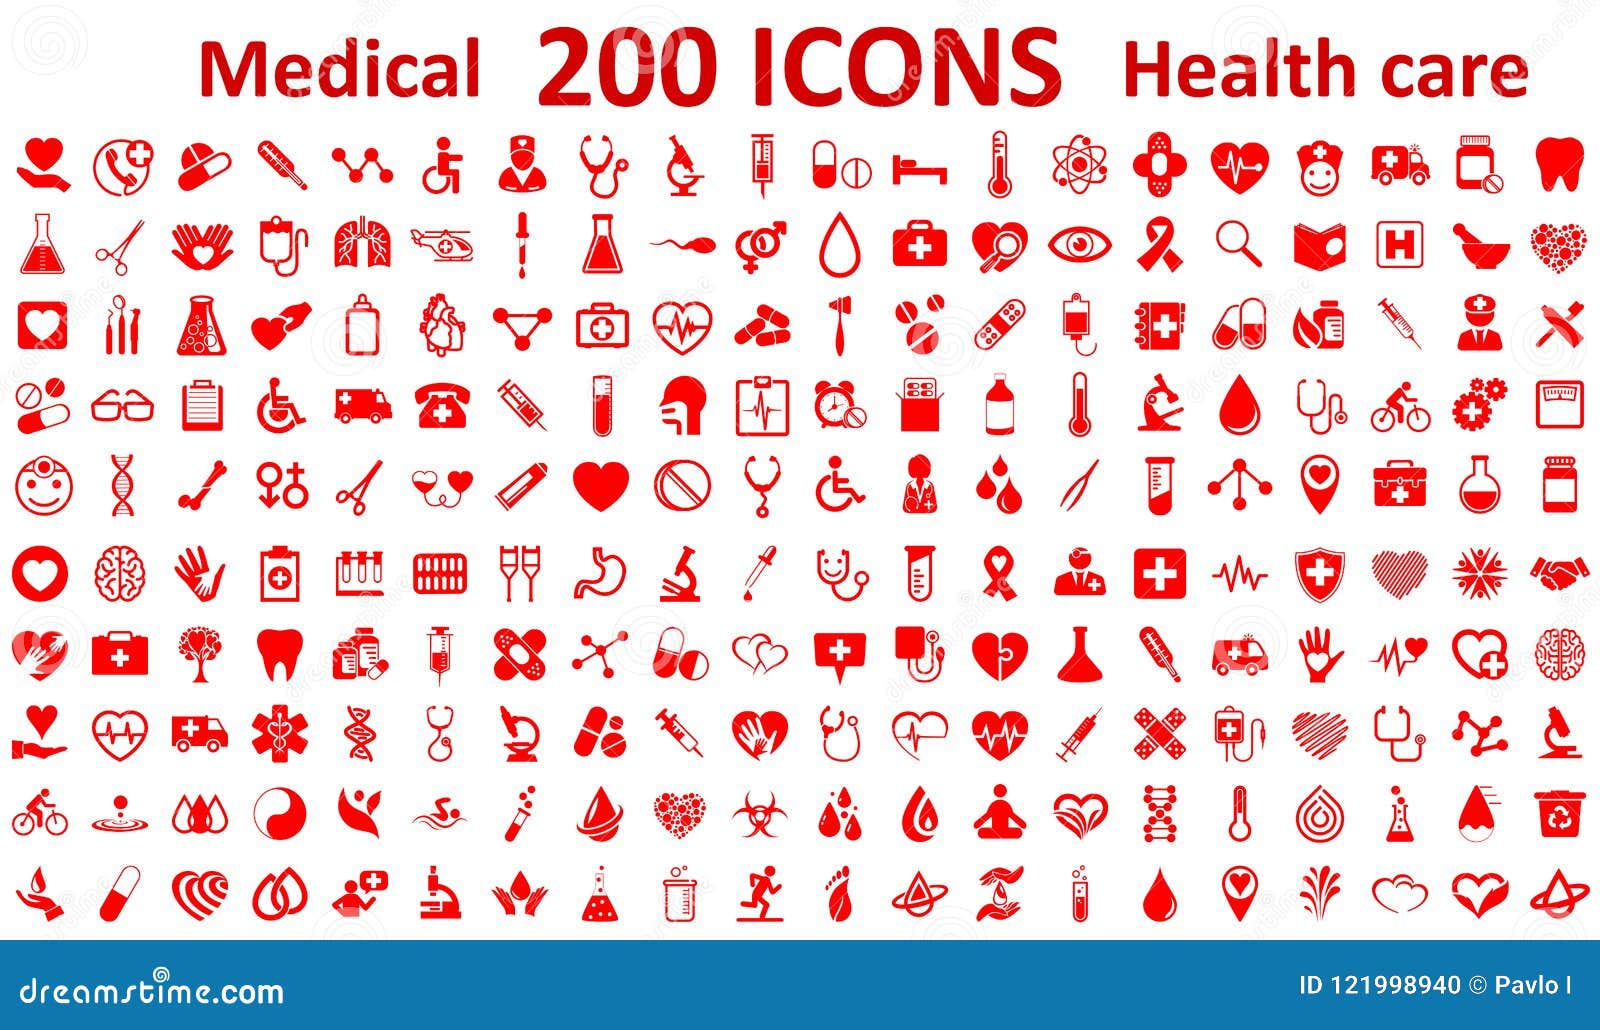 set 200 medecine and health flat icons. collection health care medical sign icons - 